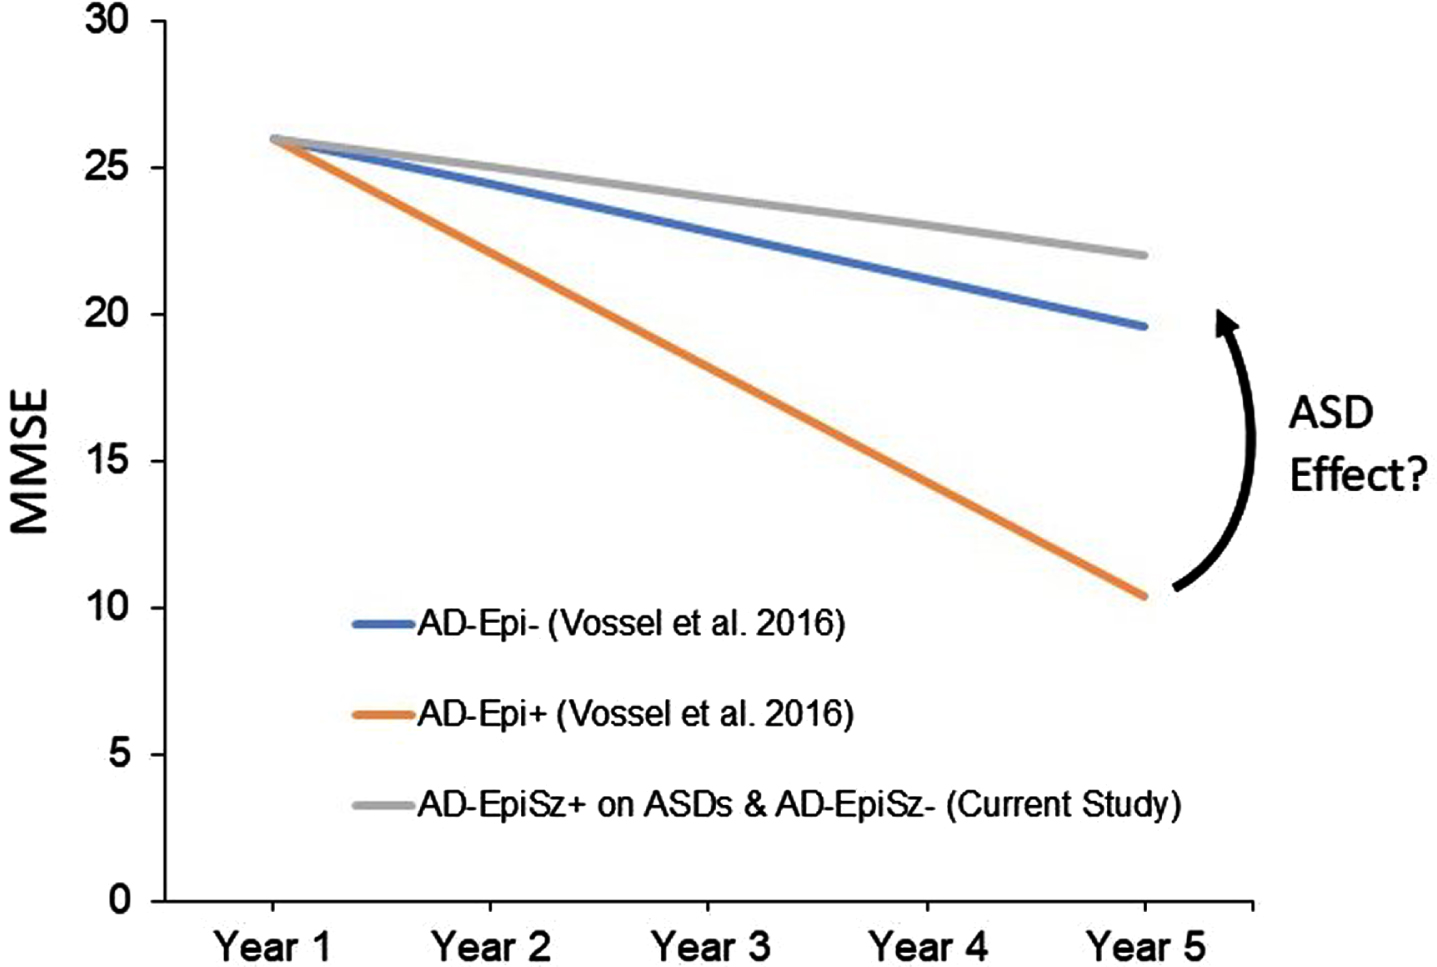 Potential disease modification with treatment of antiseizure drugs (ASD) in patients with Alzheimer’s disease (AD) and epileptic activity. In a previous study by Vossel et al. [1], AD patients with subclinical epileptic activity, detected by overnight EEG and/or 1-h magnetoencephalography recordings, had a faster decline in their Mini-Mental State Examination (MMSE) scores (AD-Epi+, 3.9 points/year) than AD patients without detectable epileptic activity (AD-Epi-, 1.6 points/year). In the current study by Hautecloque-Raysz et al. [7], patients with prodromal AD and epileptic seizures (AD-EpiSz+) treated with ASDs had a slow cognitive decline of one MMSE point a year, which was similar to the slow rate of decline in prodromal AD patients without epilepsy in their study (AD-EpiSz-), as well as the slow rate of decline in the AD-Epi- group in Vossel et al. These studies indicate that epileptic activity worsens cognitive decline in AD and that ASDs can slow progression in AD patients with detectible epileptic activity.